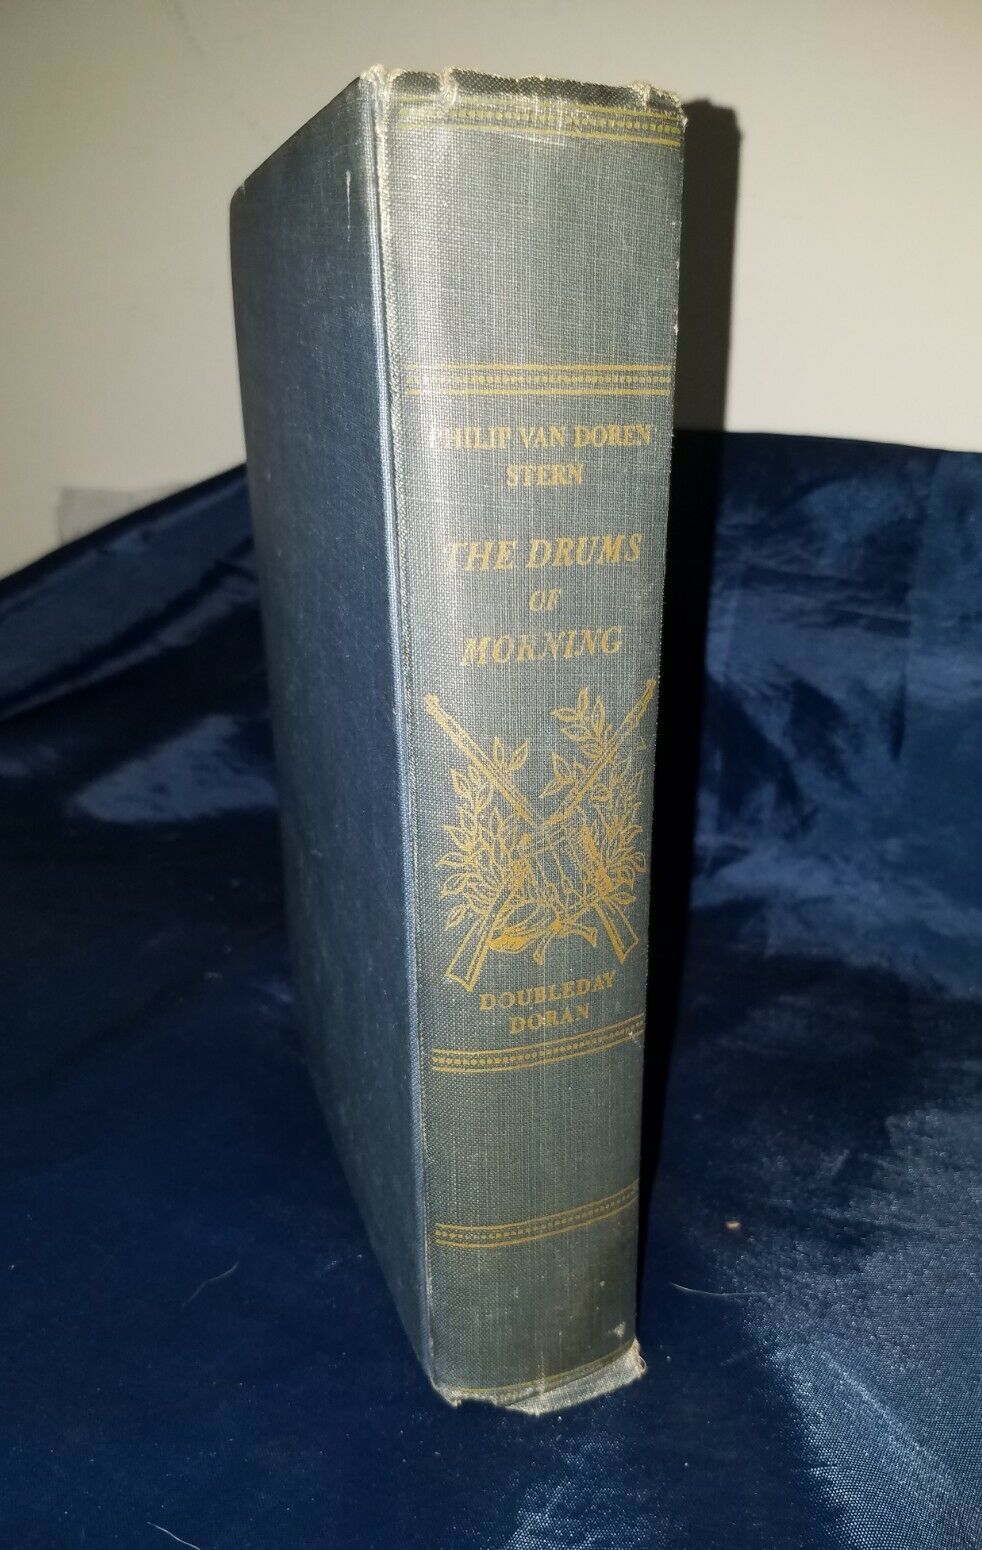 PHILIP VAN  DOREN STERN  THE DRUMS OF MORNING, 1st Edition 1942